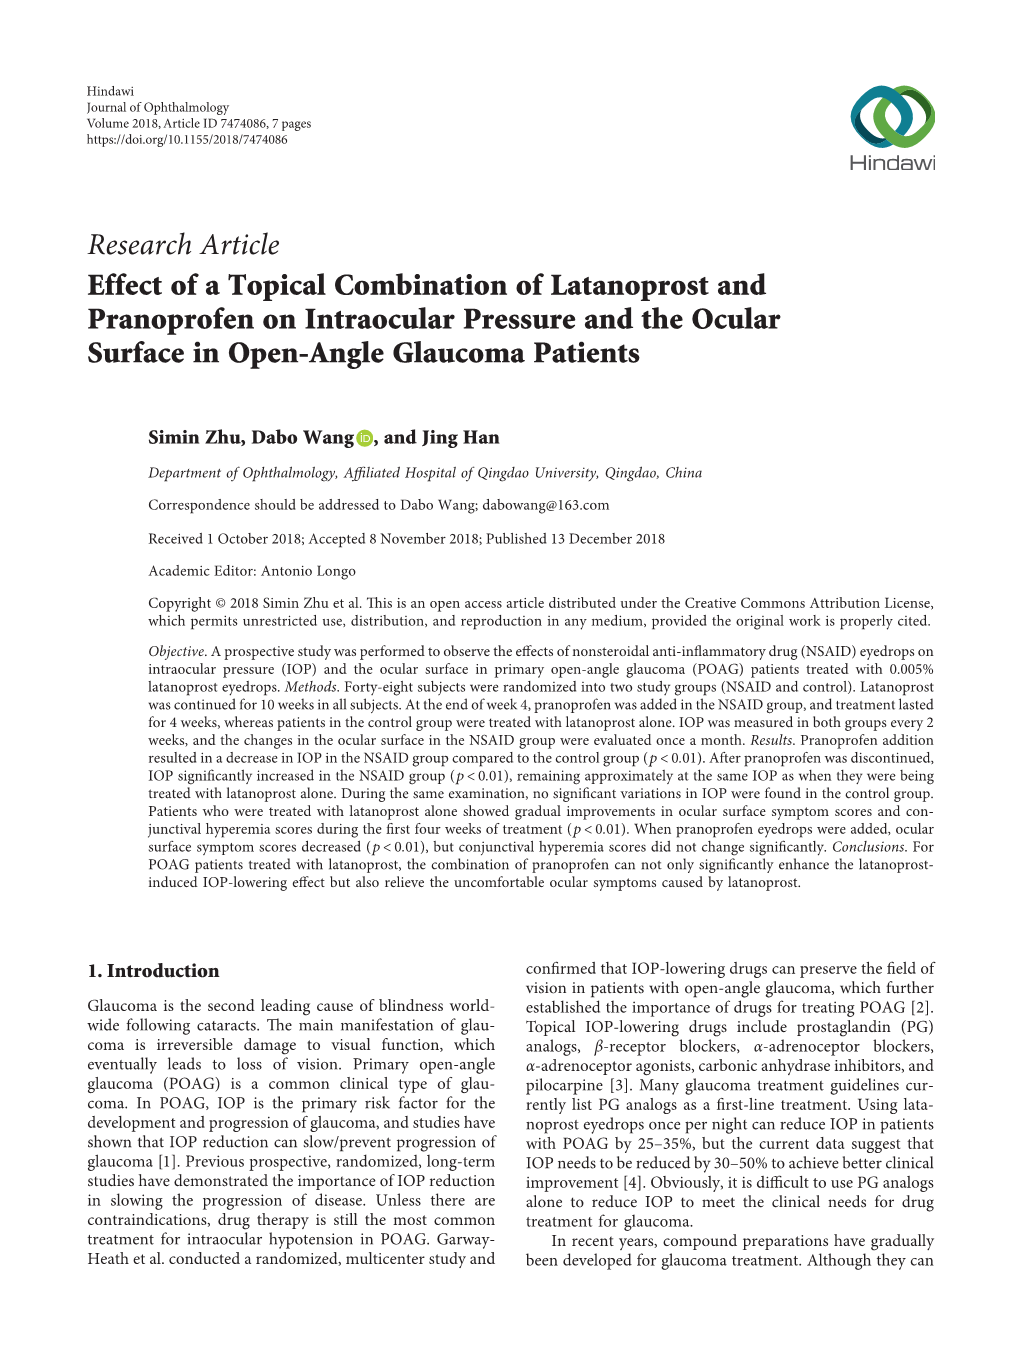 Effect of a Topical Combination of Latanoprost and Pranoprofen on Intraocular Pressure and the Ocular Surface in Open-Angle Glaucoma Patients